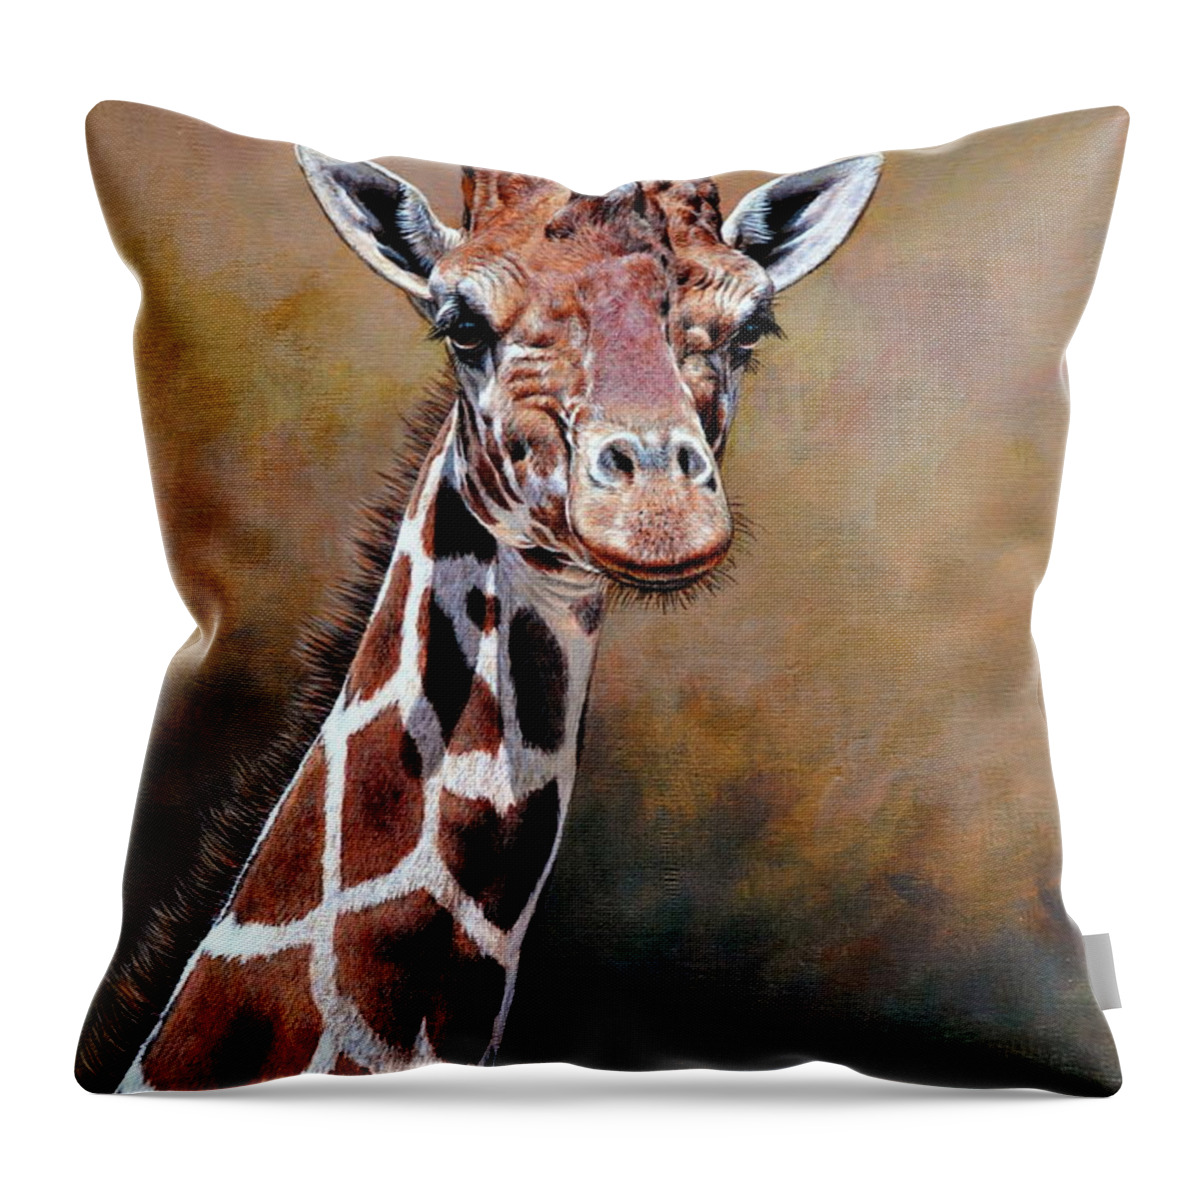 Keywords: Paintings Throw Pillow featuring the painting Giraffe Portrait by Alan M Hunt by Alan M Hunt